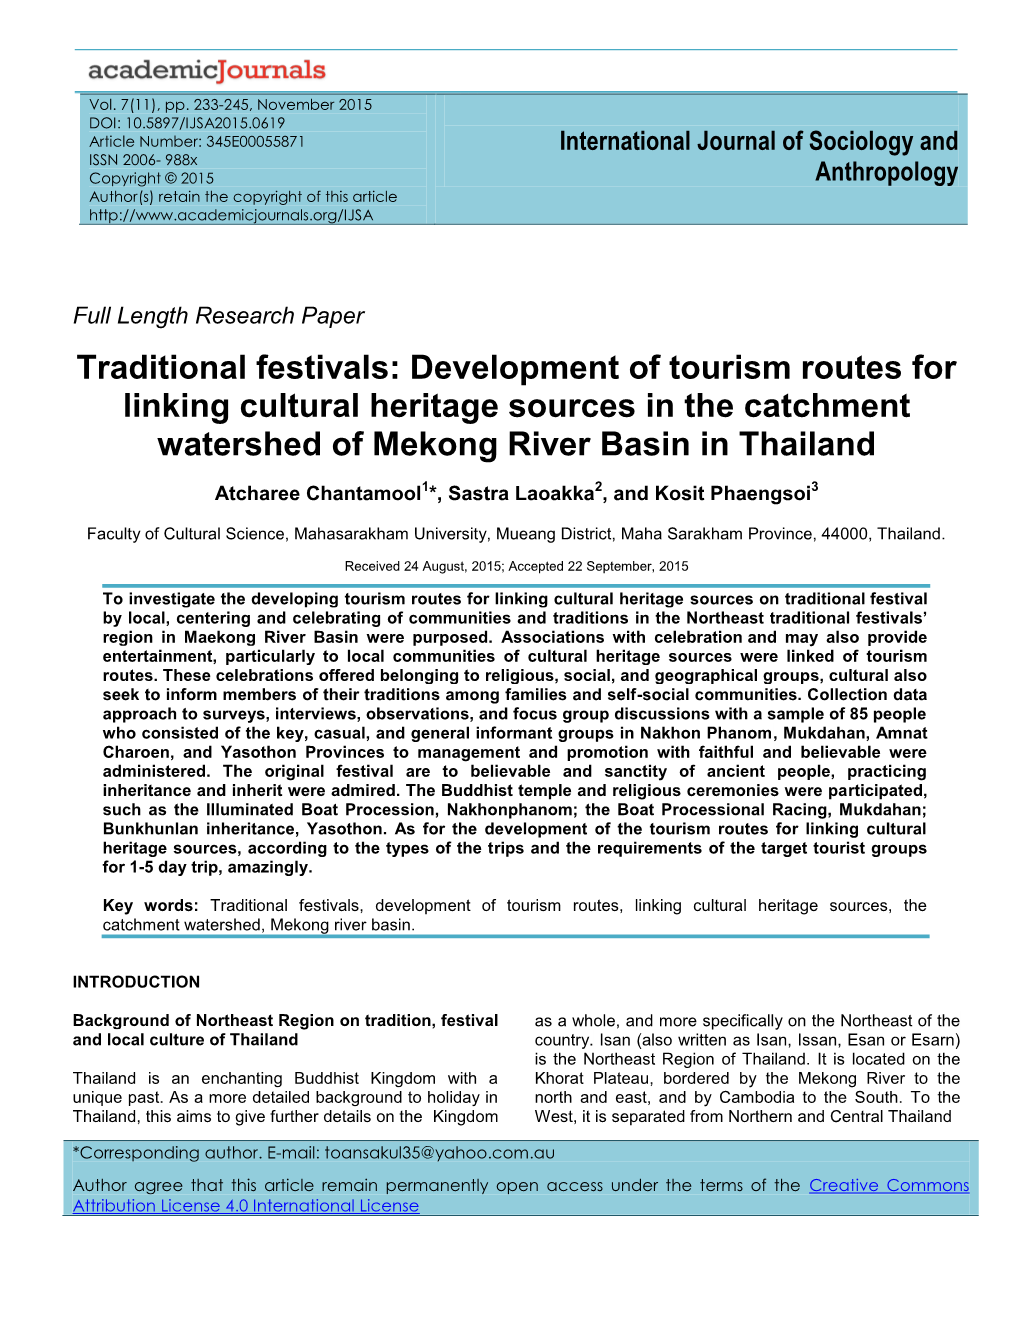 Traditional Festivals: Development of Tourism Routes for Linking Cultural Heritage Sources in the Catchment Watershed of Mekong River Basin in Thailand